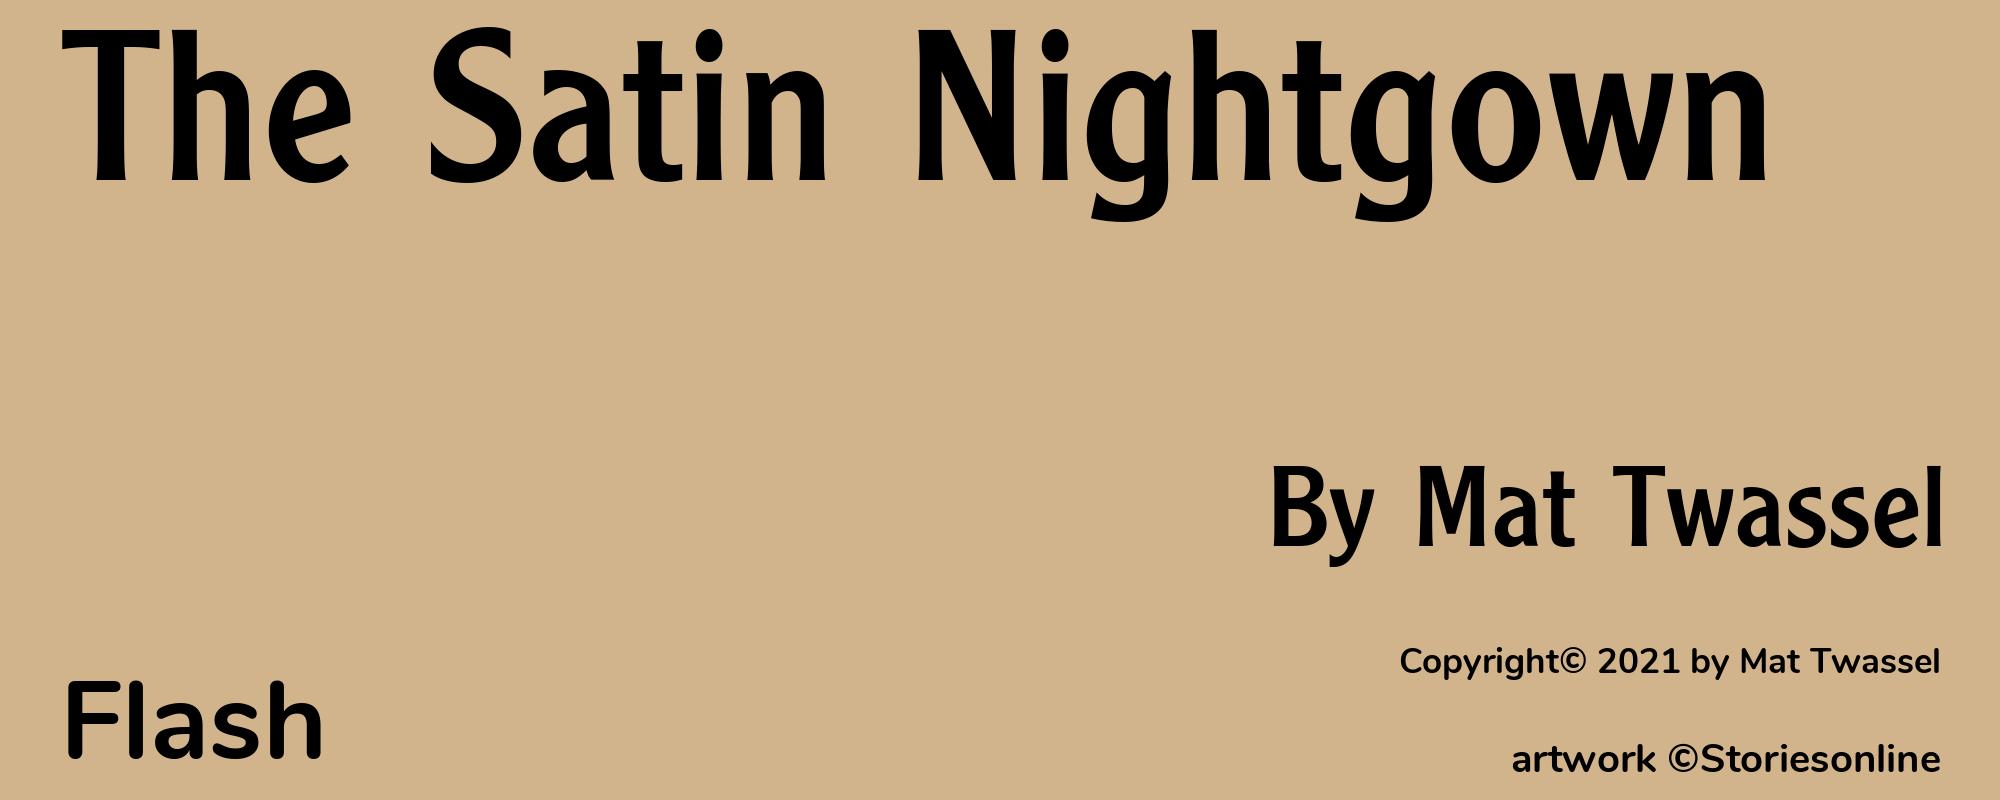 The Satin Nightgown - Cover